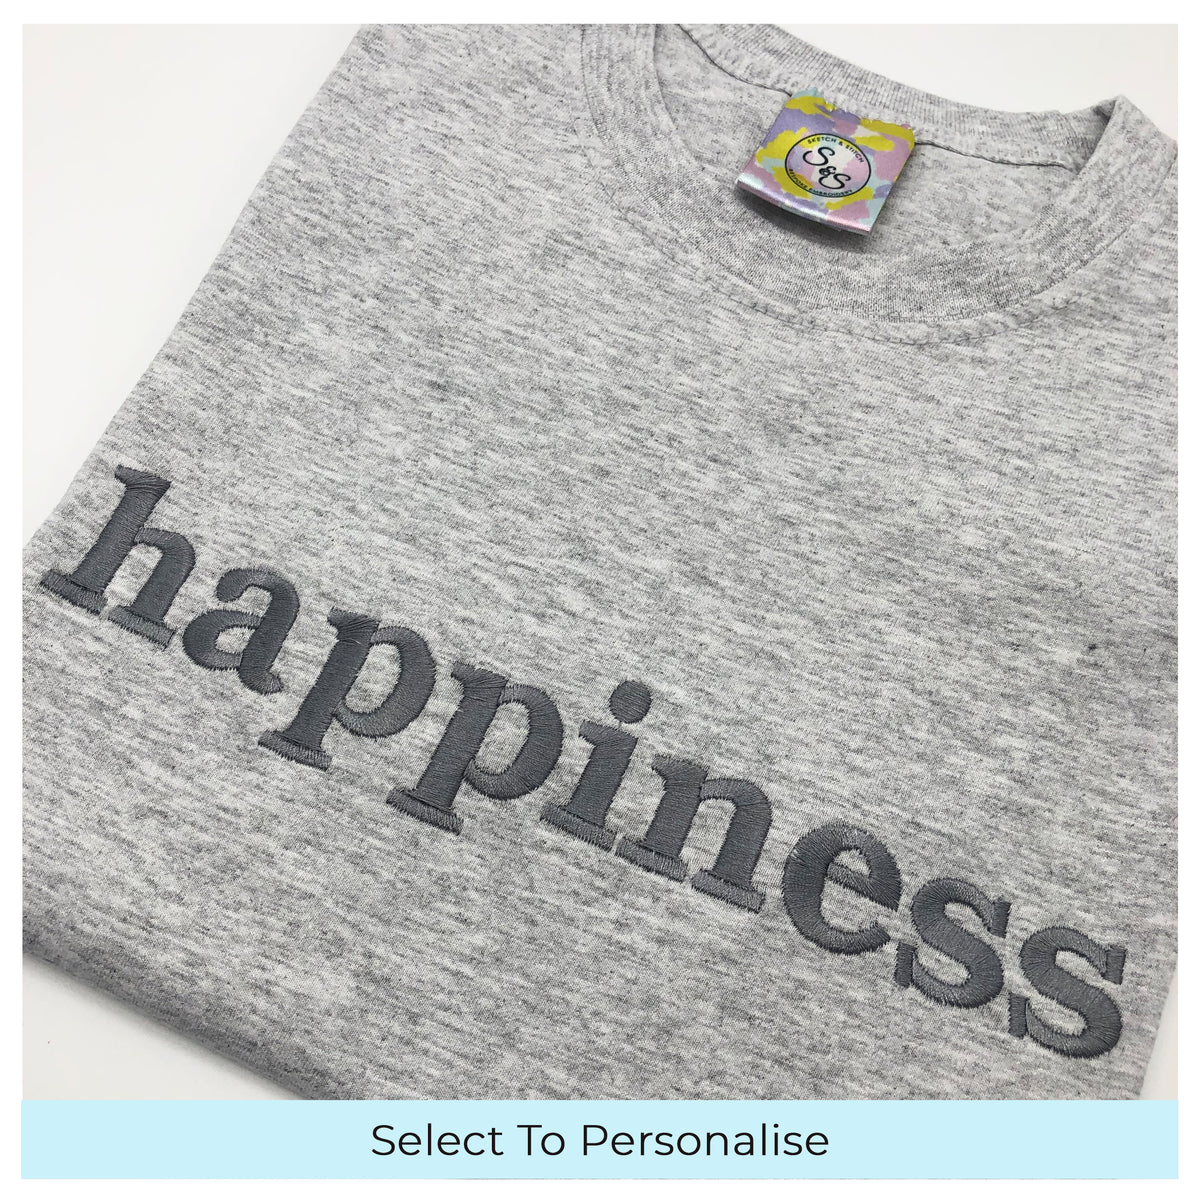 Personalised Text T-shirt. Create the best customised gifts for birthday, personalised gifts for boyfriends and anniversary gifts.